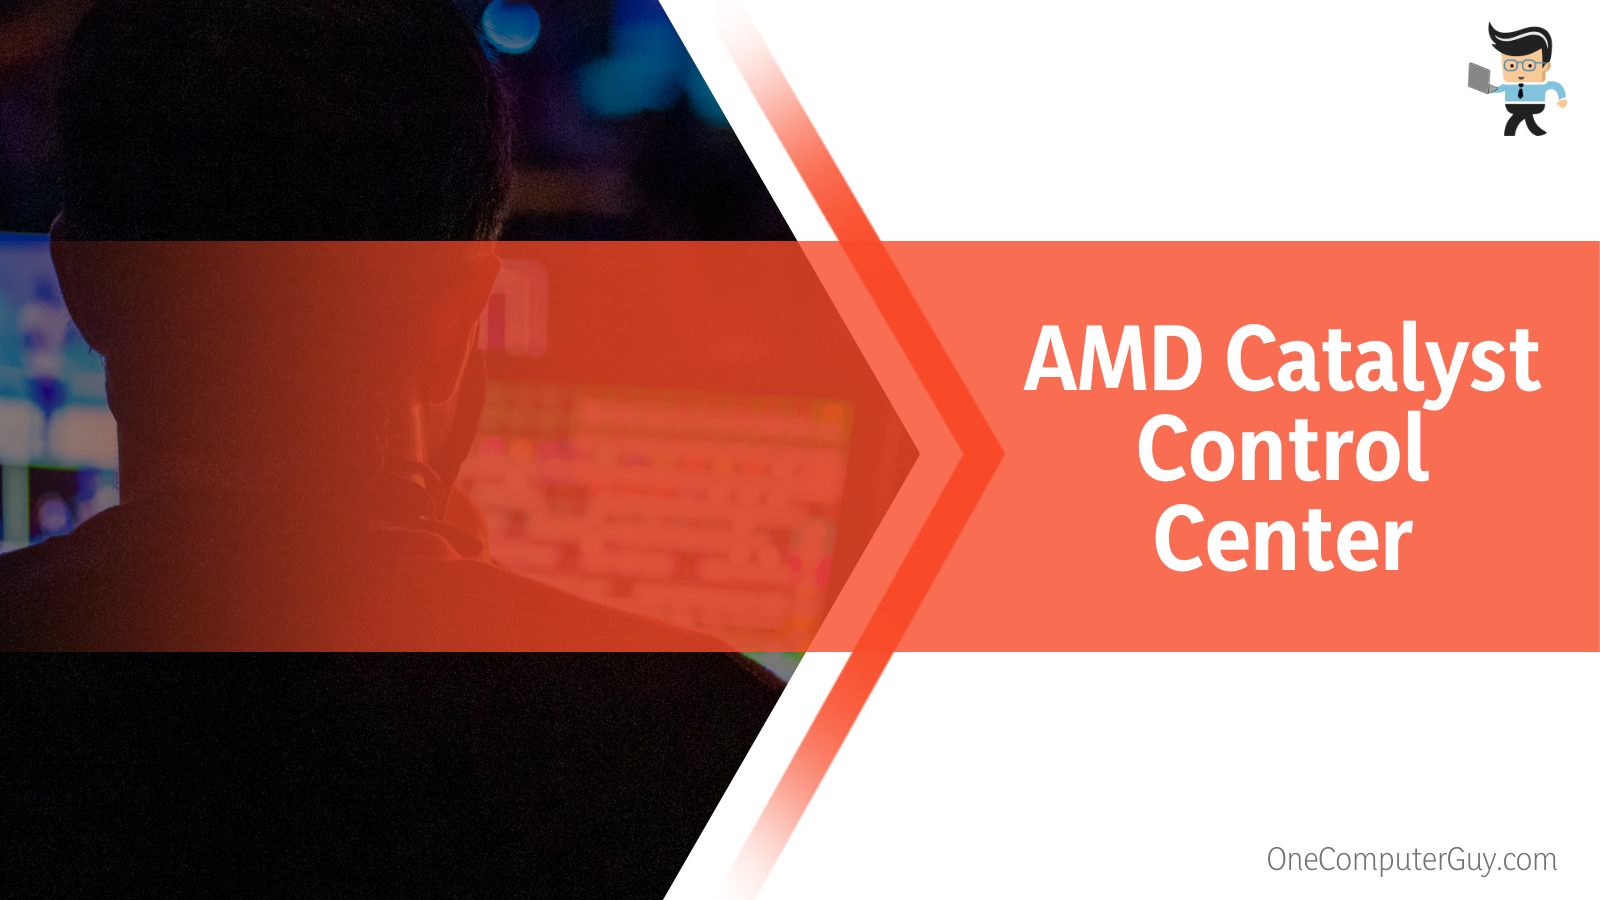 Use the AMD Catalyst Control Center